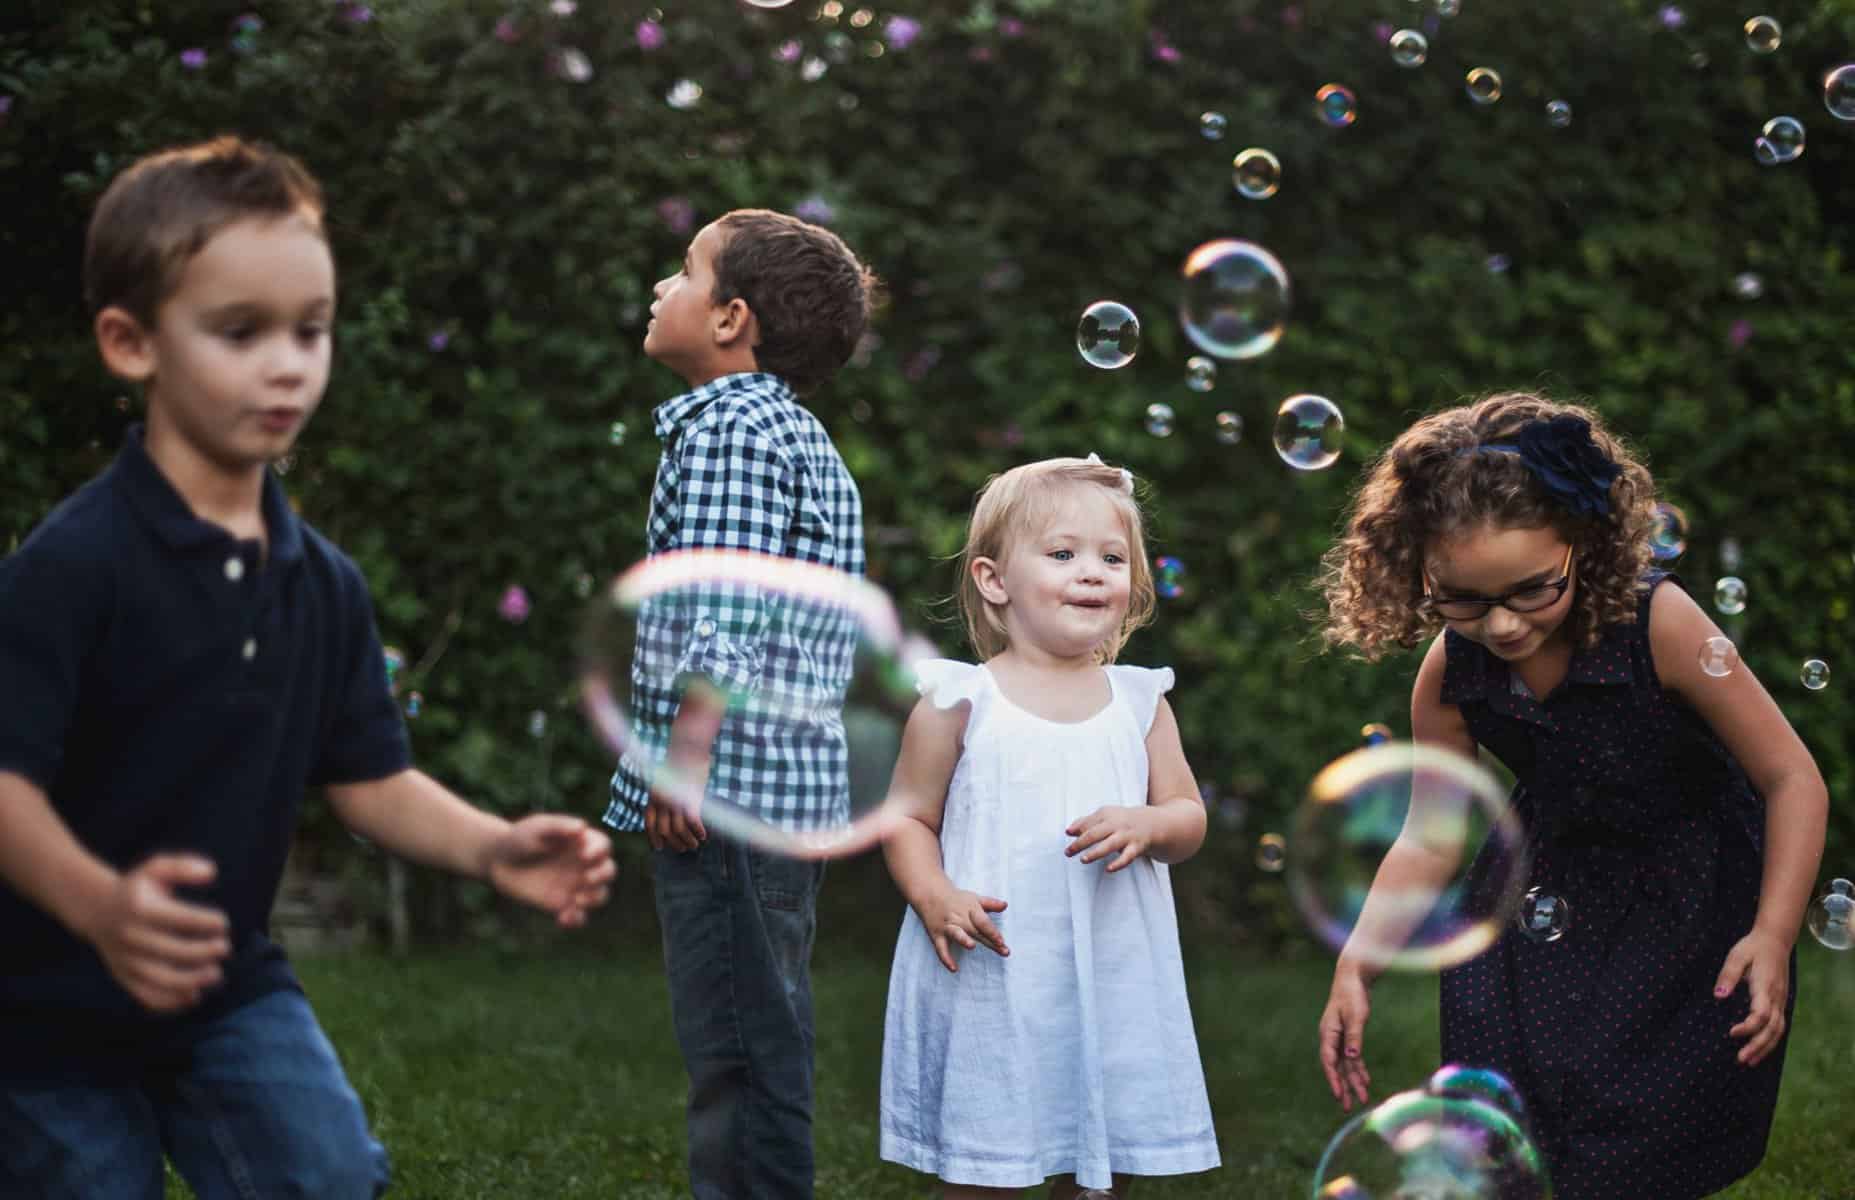 Young kids blowing bubbles.